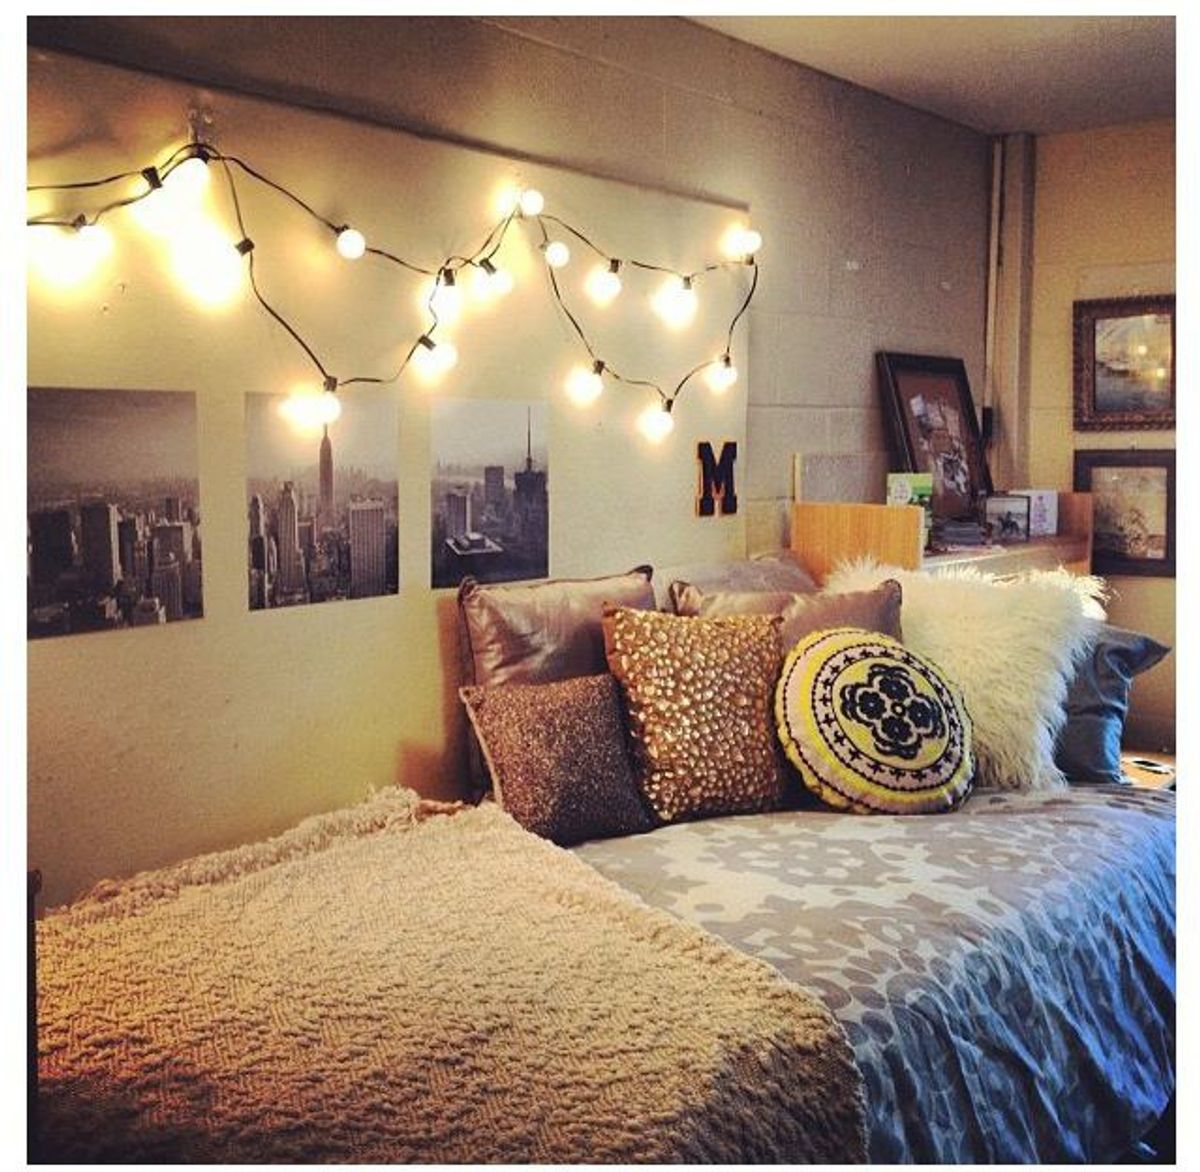 10 Ideas To Decorate Your College Dorm